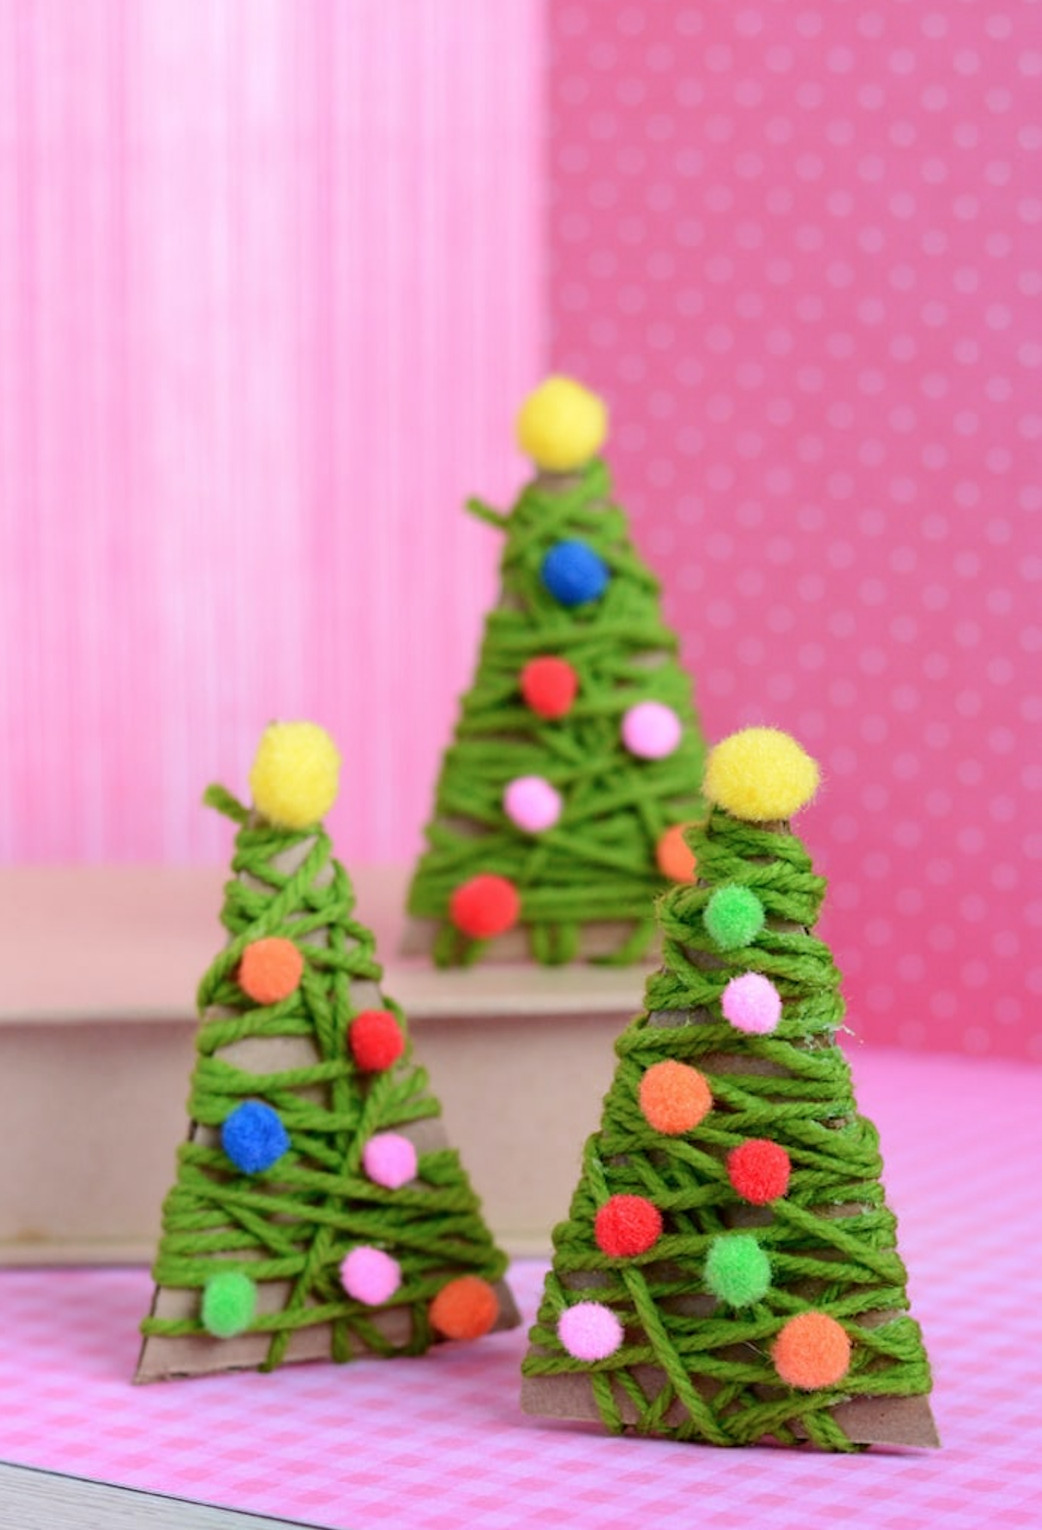 DIY Kid Christmas Crafts
 DIY Christmas Ornament Crafts for Kids A Little Craft In